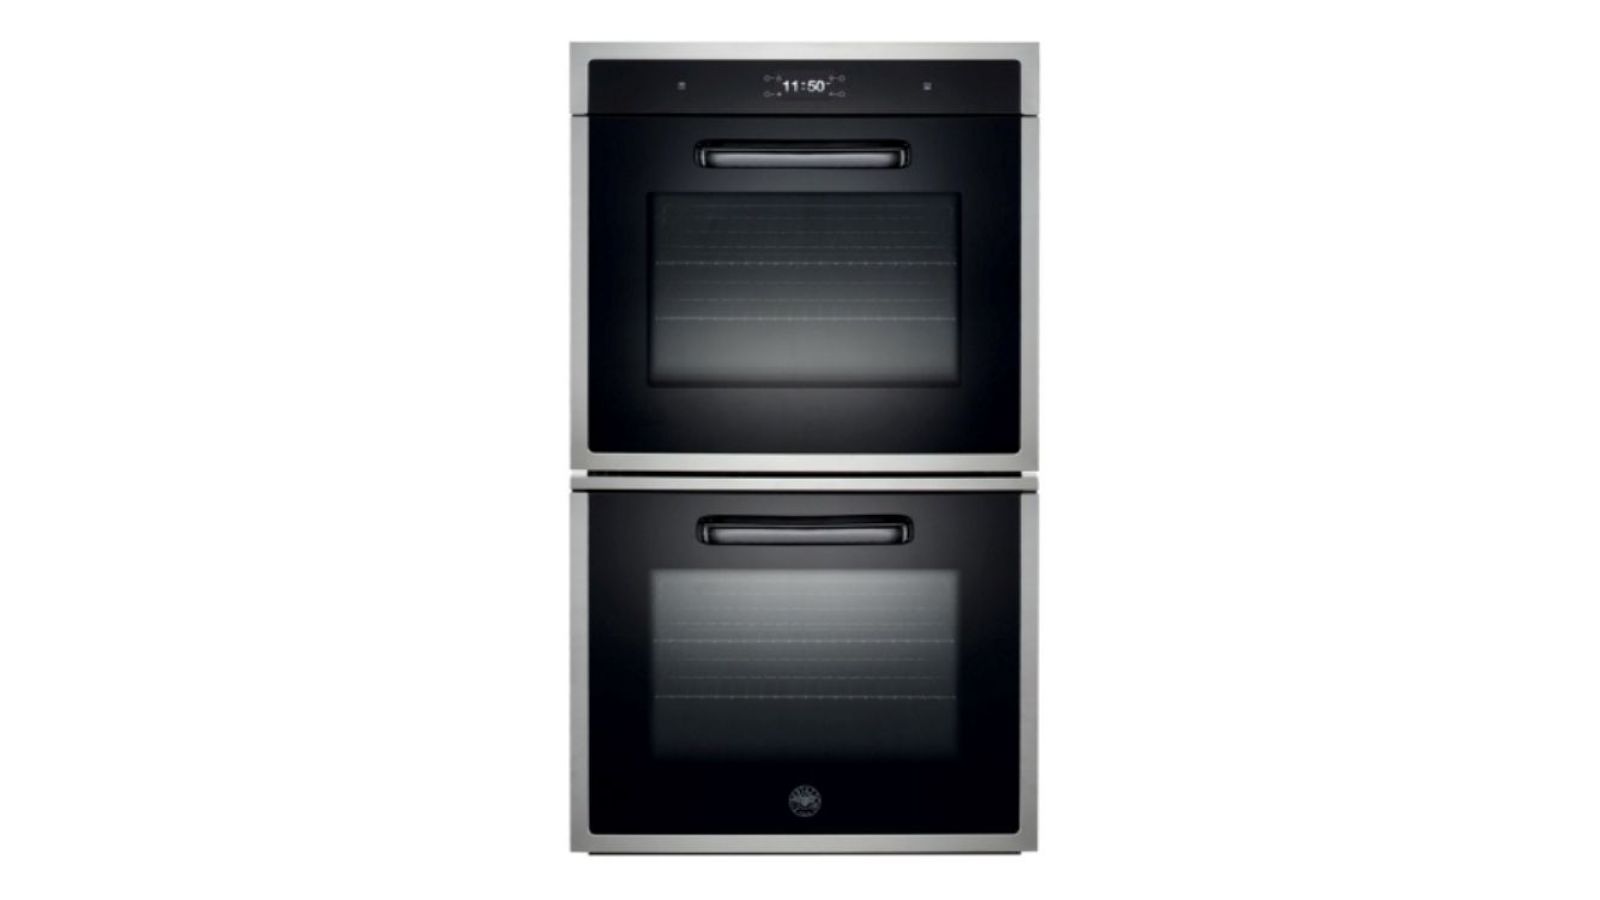 Design Series 30 inch Double Oven FD30 XT and XE